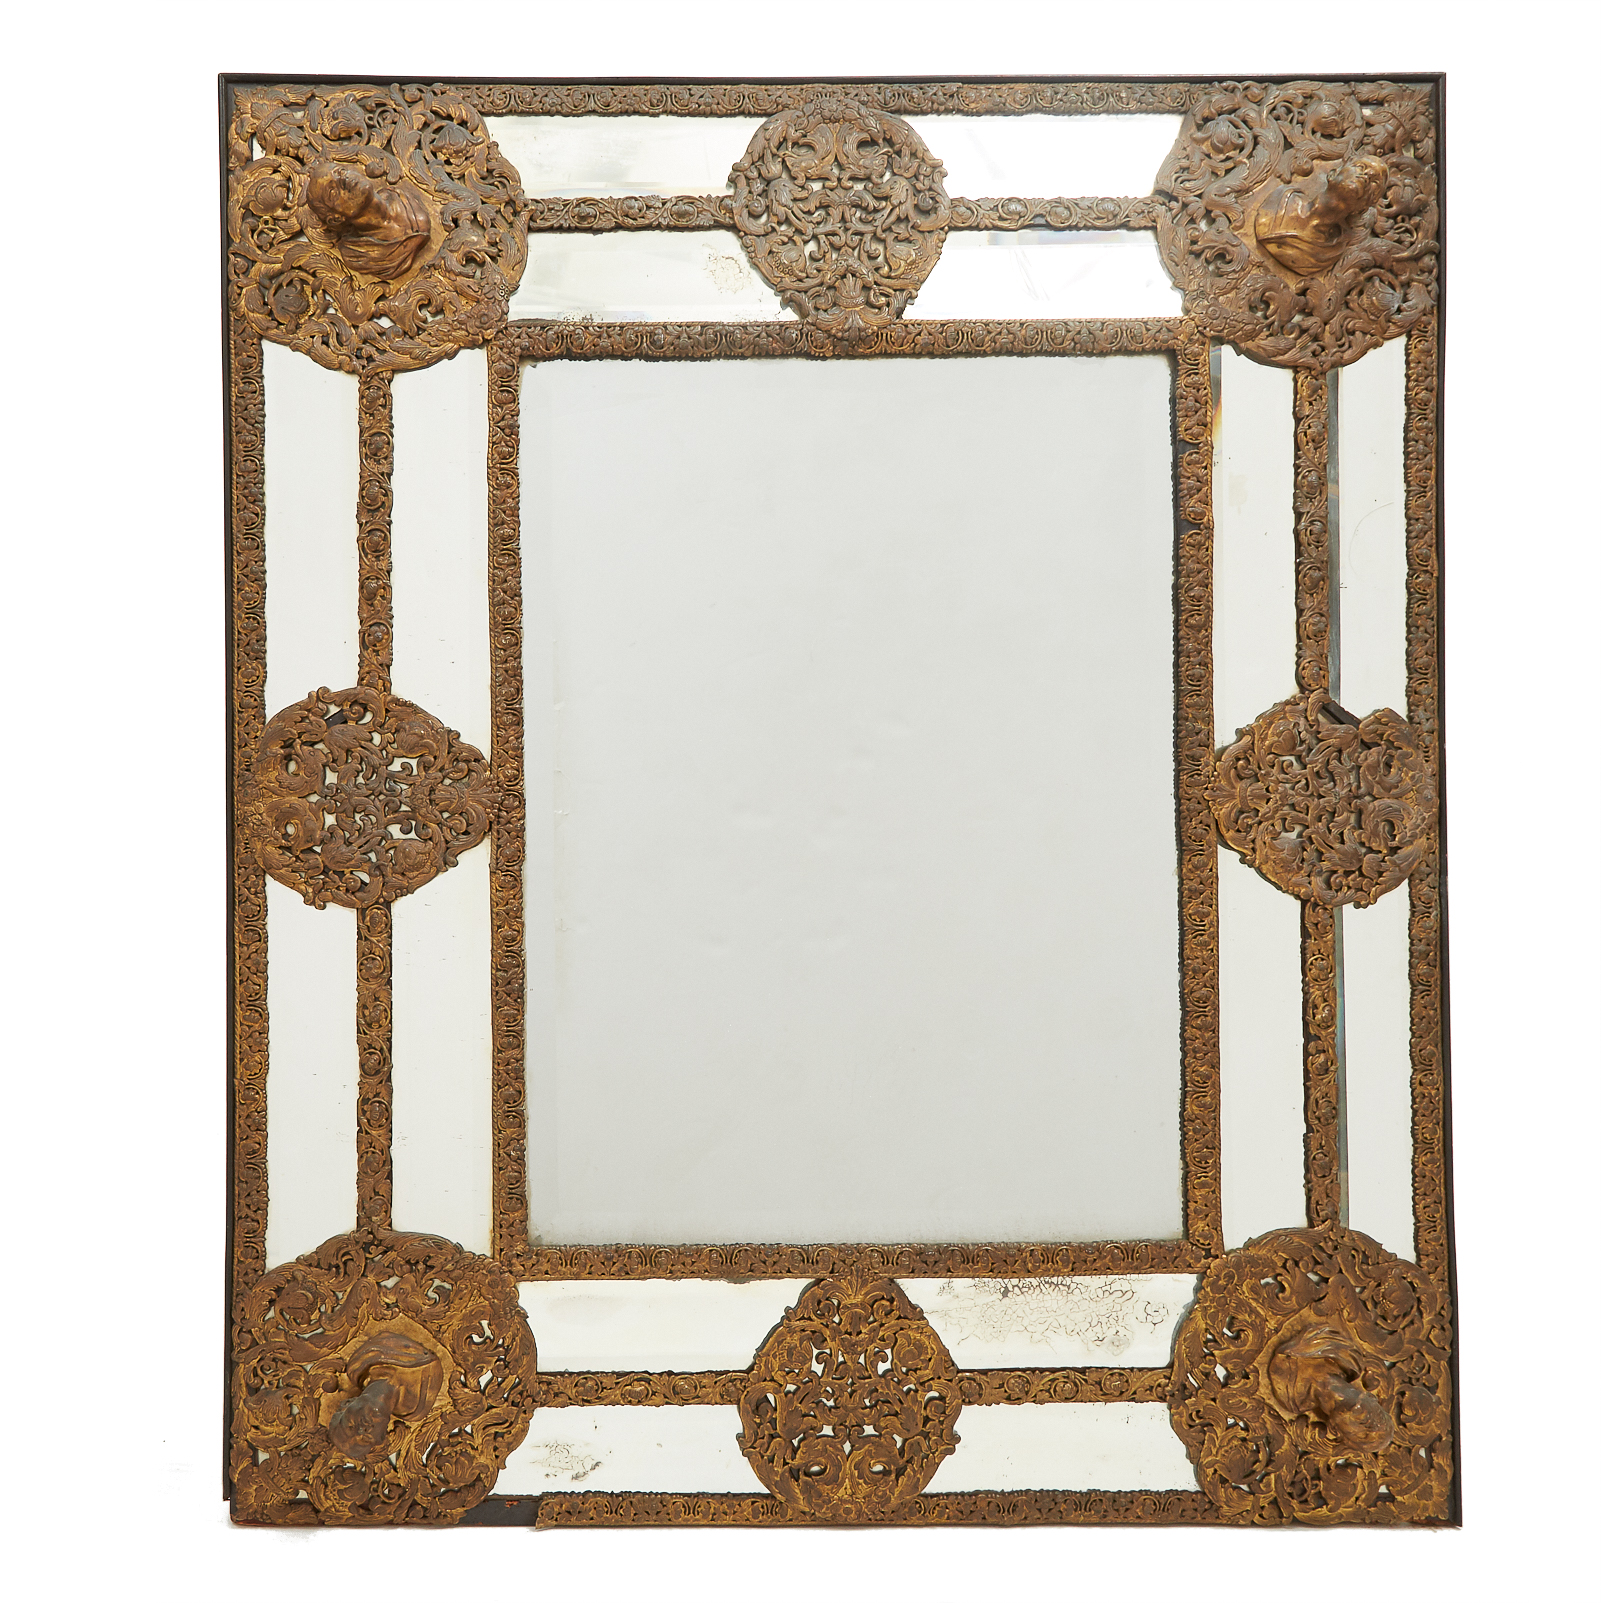 Large North Italian Gilt Bronze and Repoussé Mirror Framed Cushion Mirror, probably Venice, 18th century